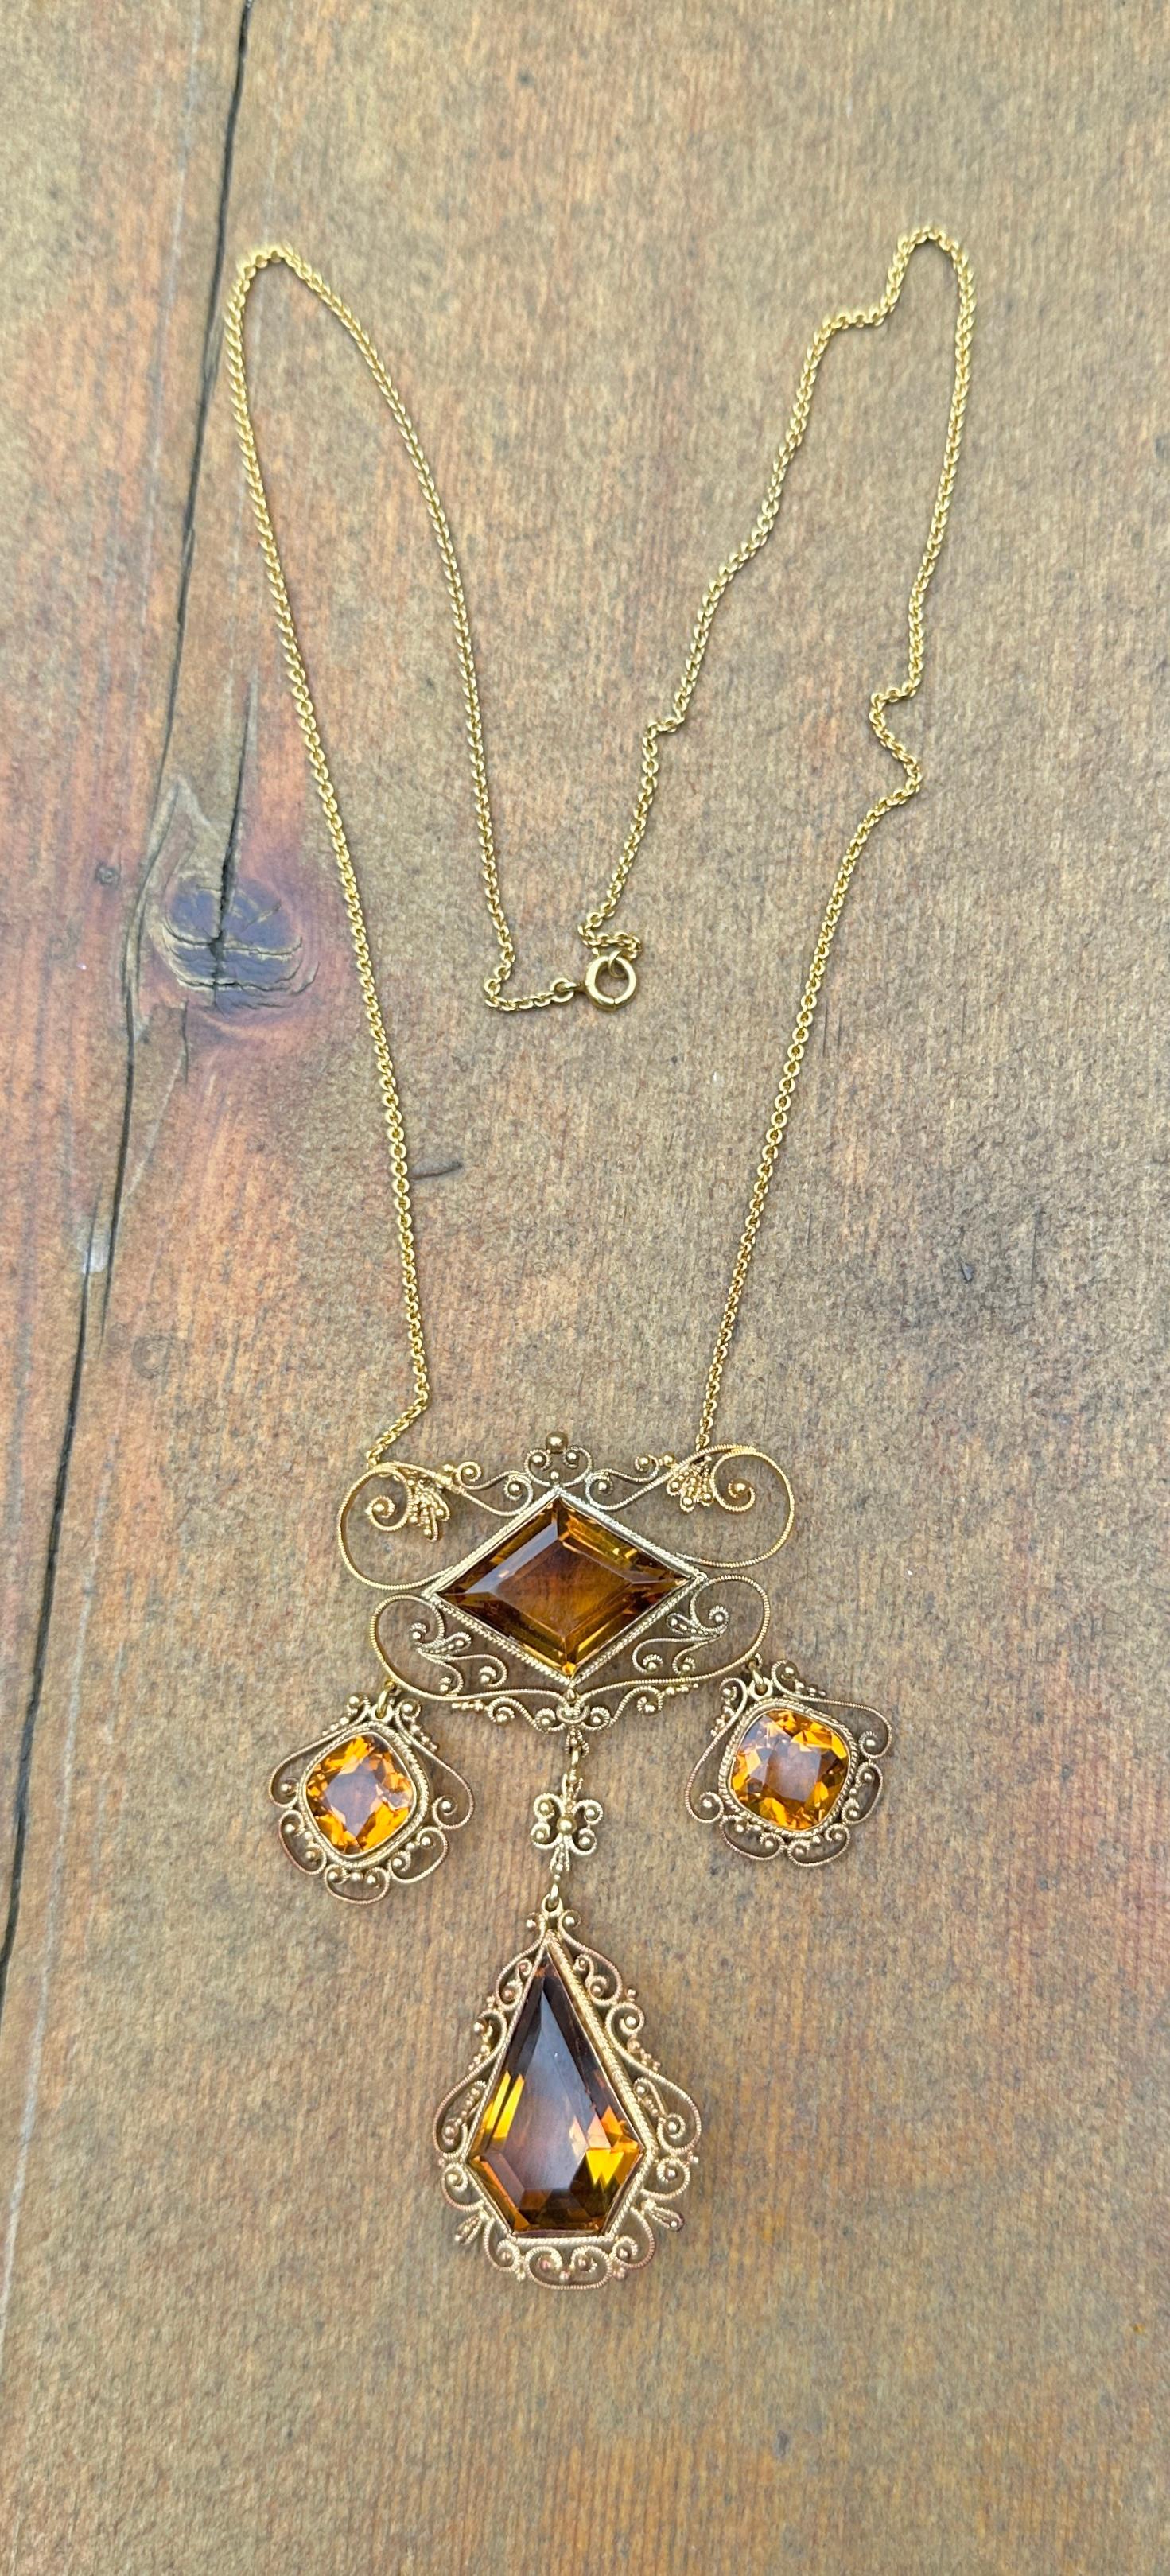 Belle Epoque Citrine Pendant Necklace Antique Victorian 14 Karat Gold Circa 1860 In Good Condition For Sale In New York, NY